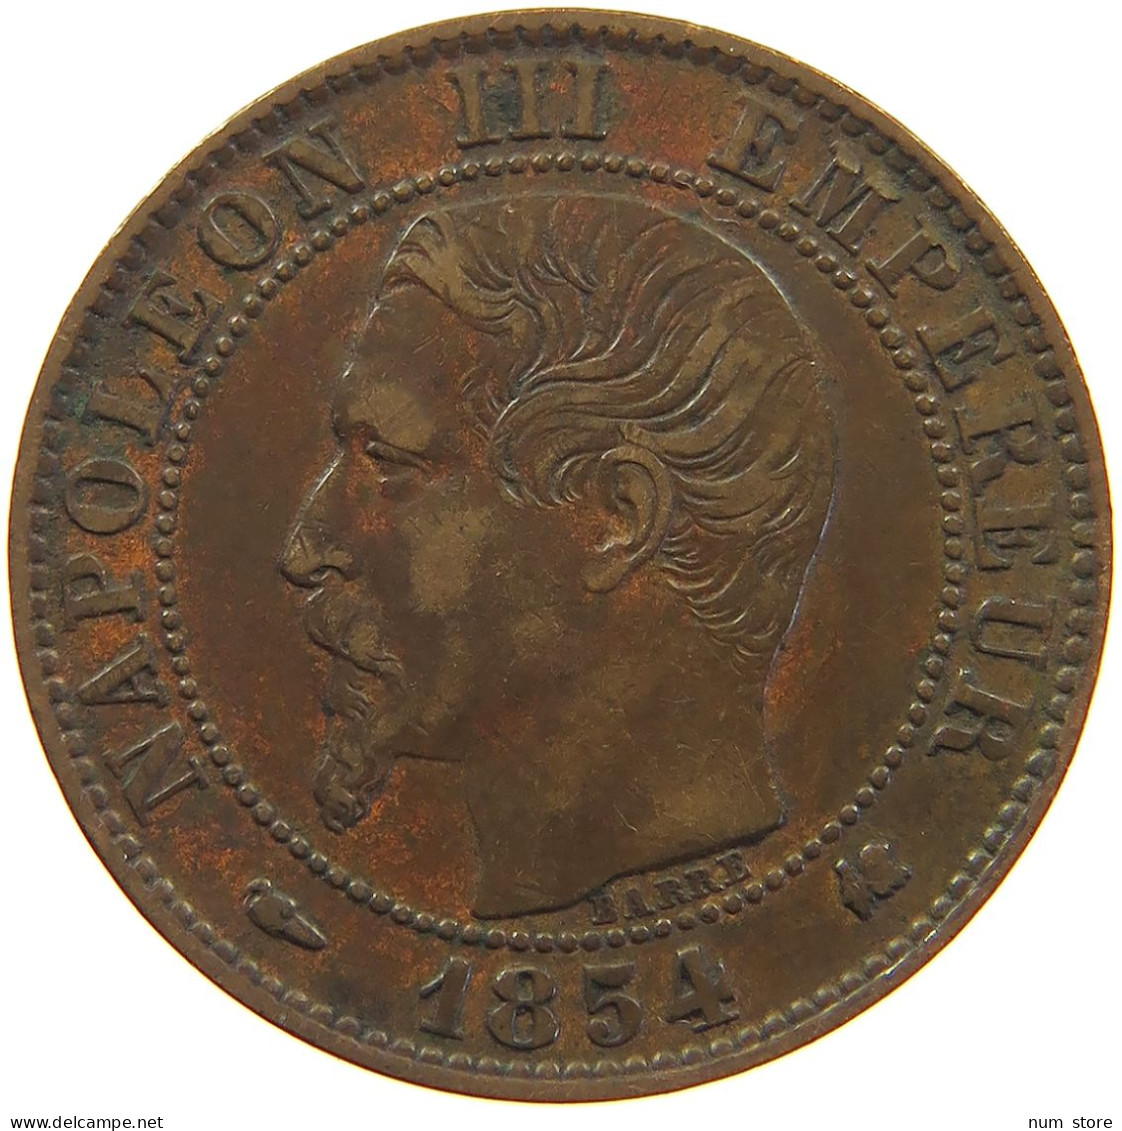 FRANCE 5 CENTIMES 1854 K Napoleon III. (1852-1870) #t016 0179 - 5 Centimes